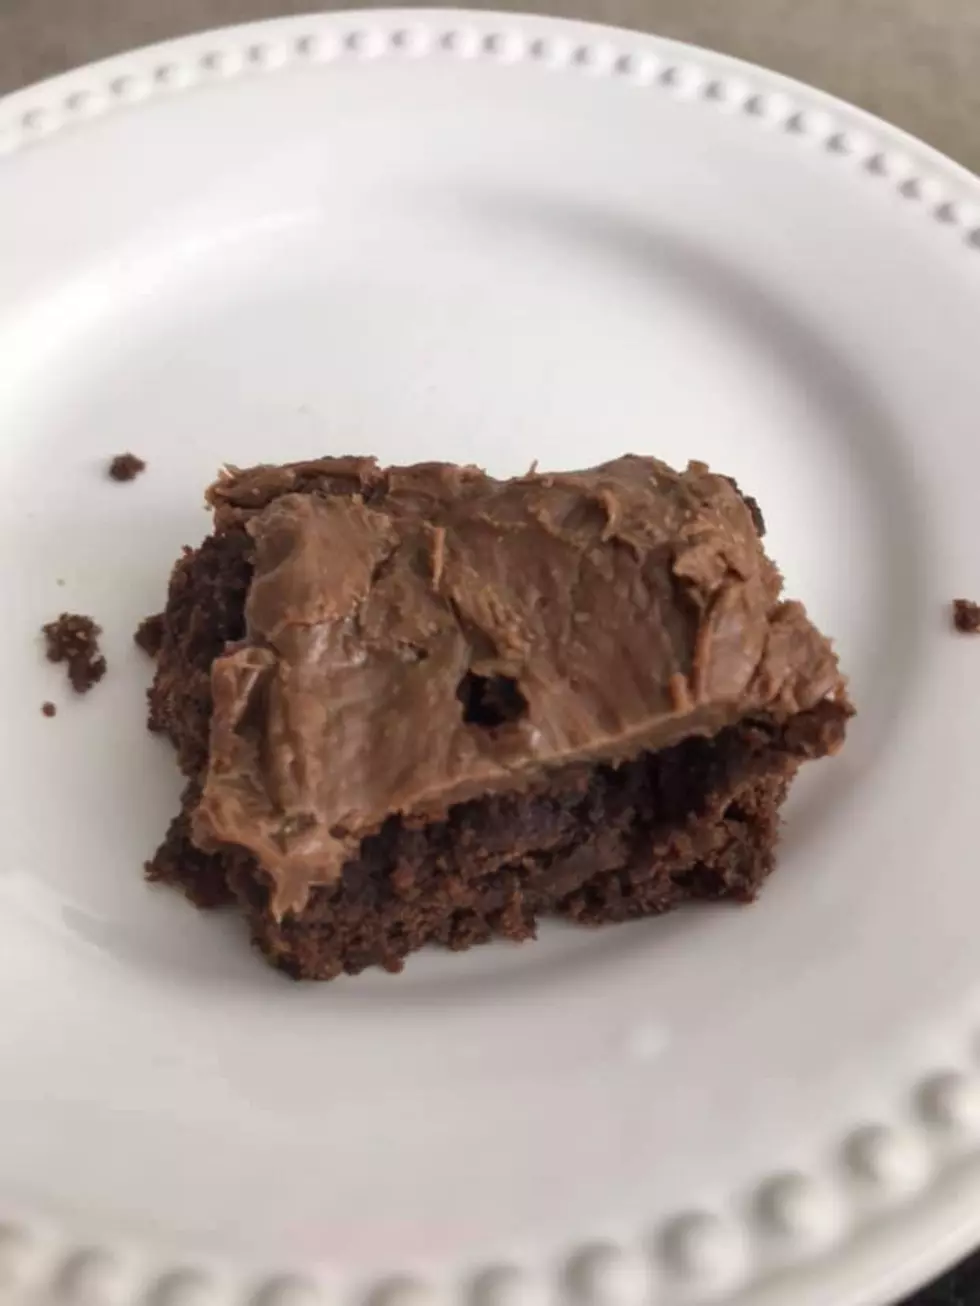 80 Calorie Brownie Recipe for Thanksgiving Health Conscious